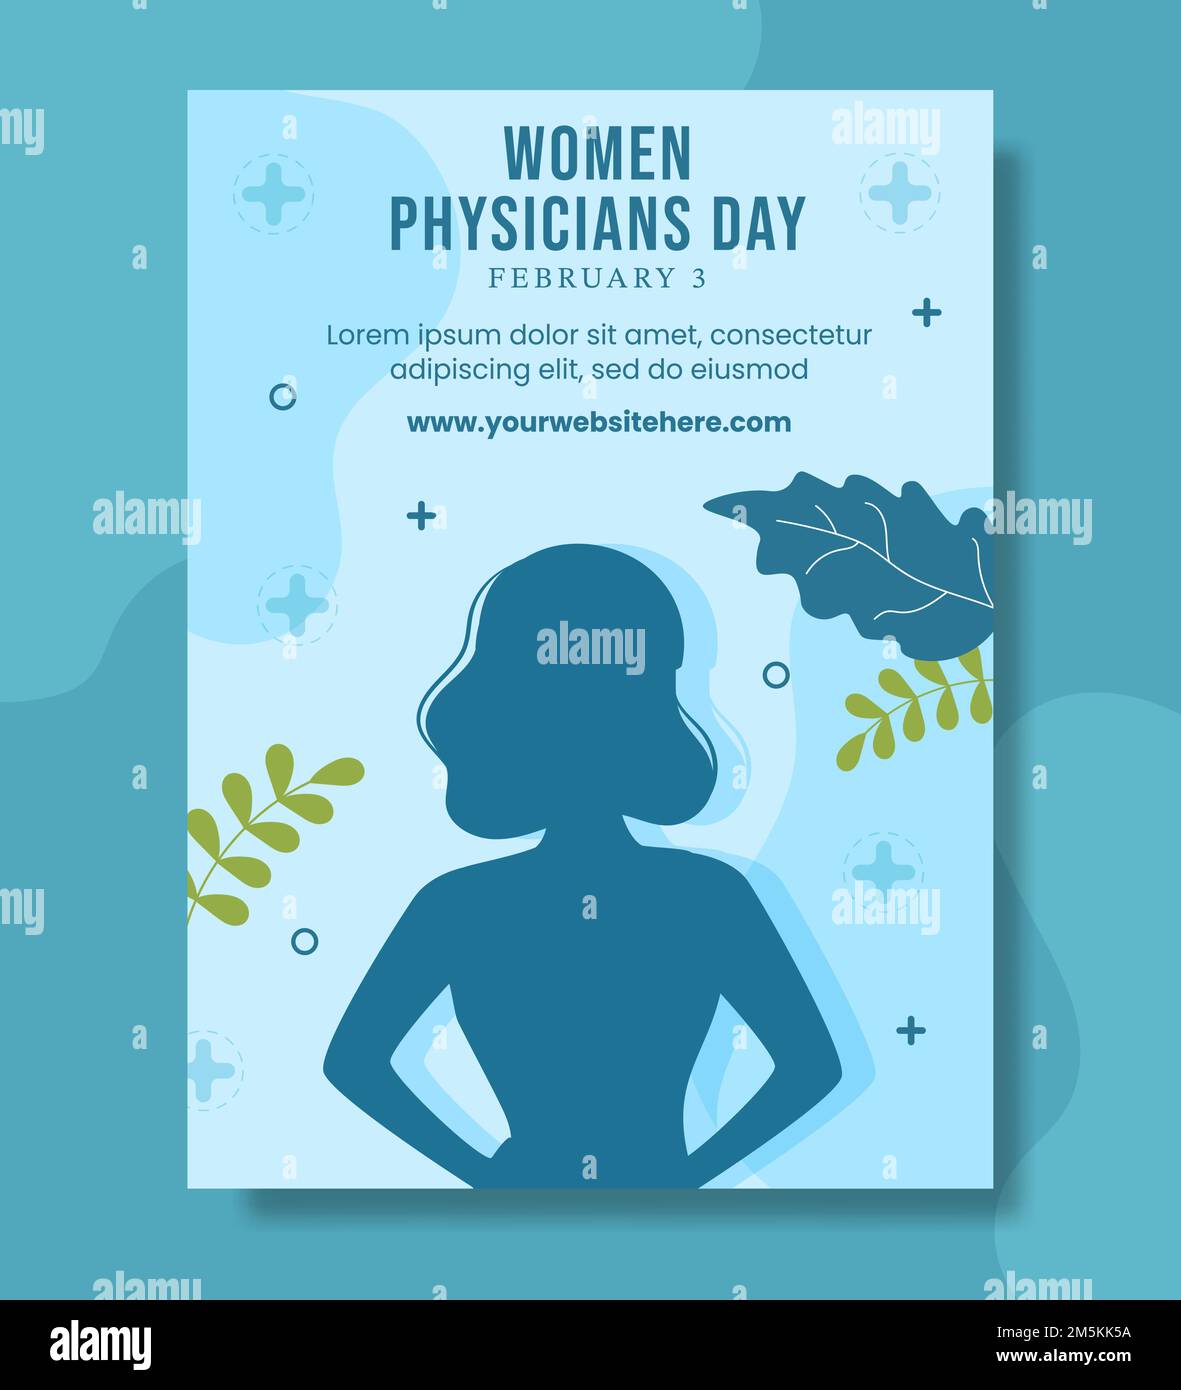 National Women Physicians Day Poster Flat Cartoon Hand Drawn Templates Illustration Stock Vector